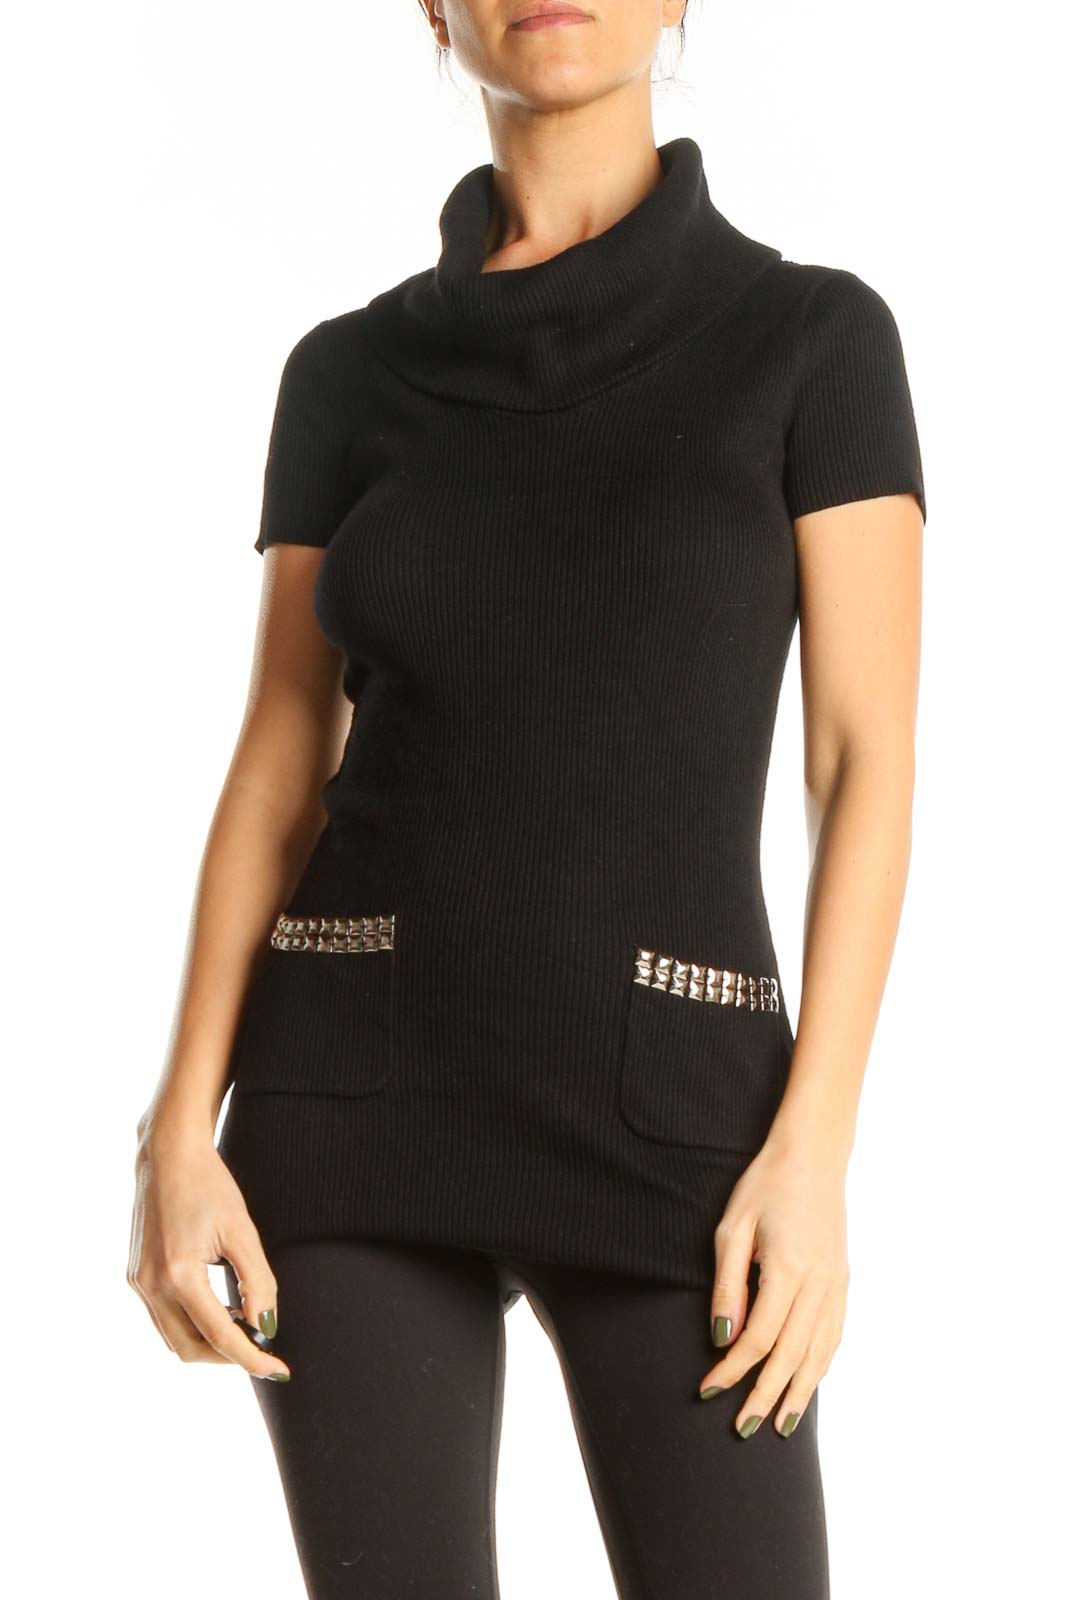 Black Sequin All Day Wear Sweater Top Front